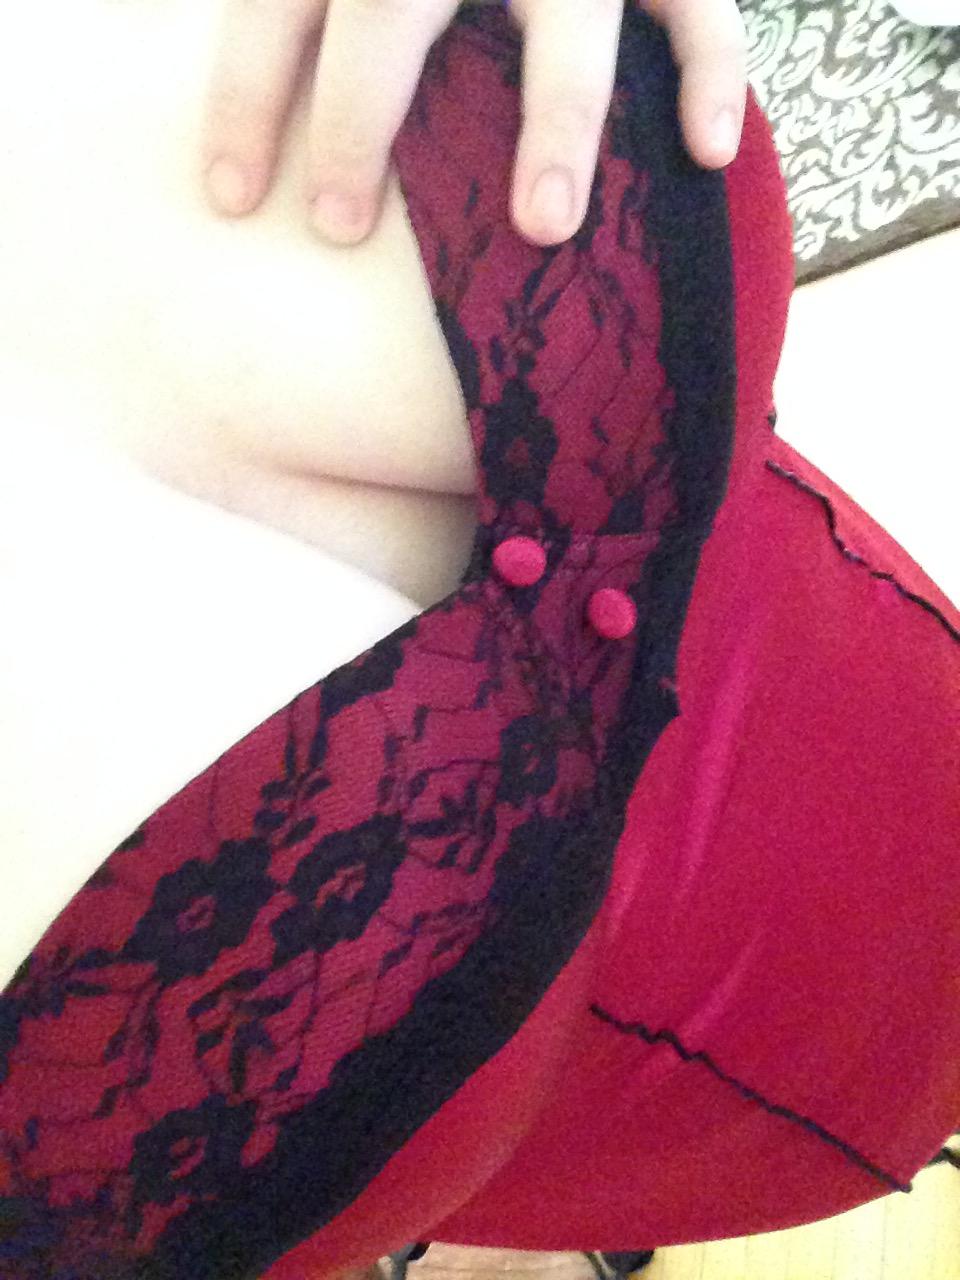 Feeling so naughty and lonely on this Saturday afternoon... (F)